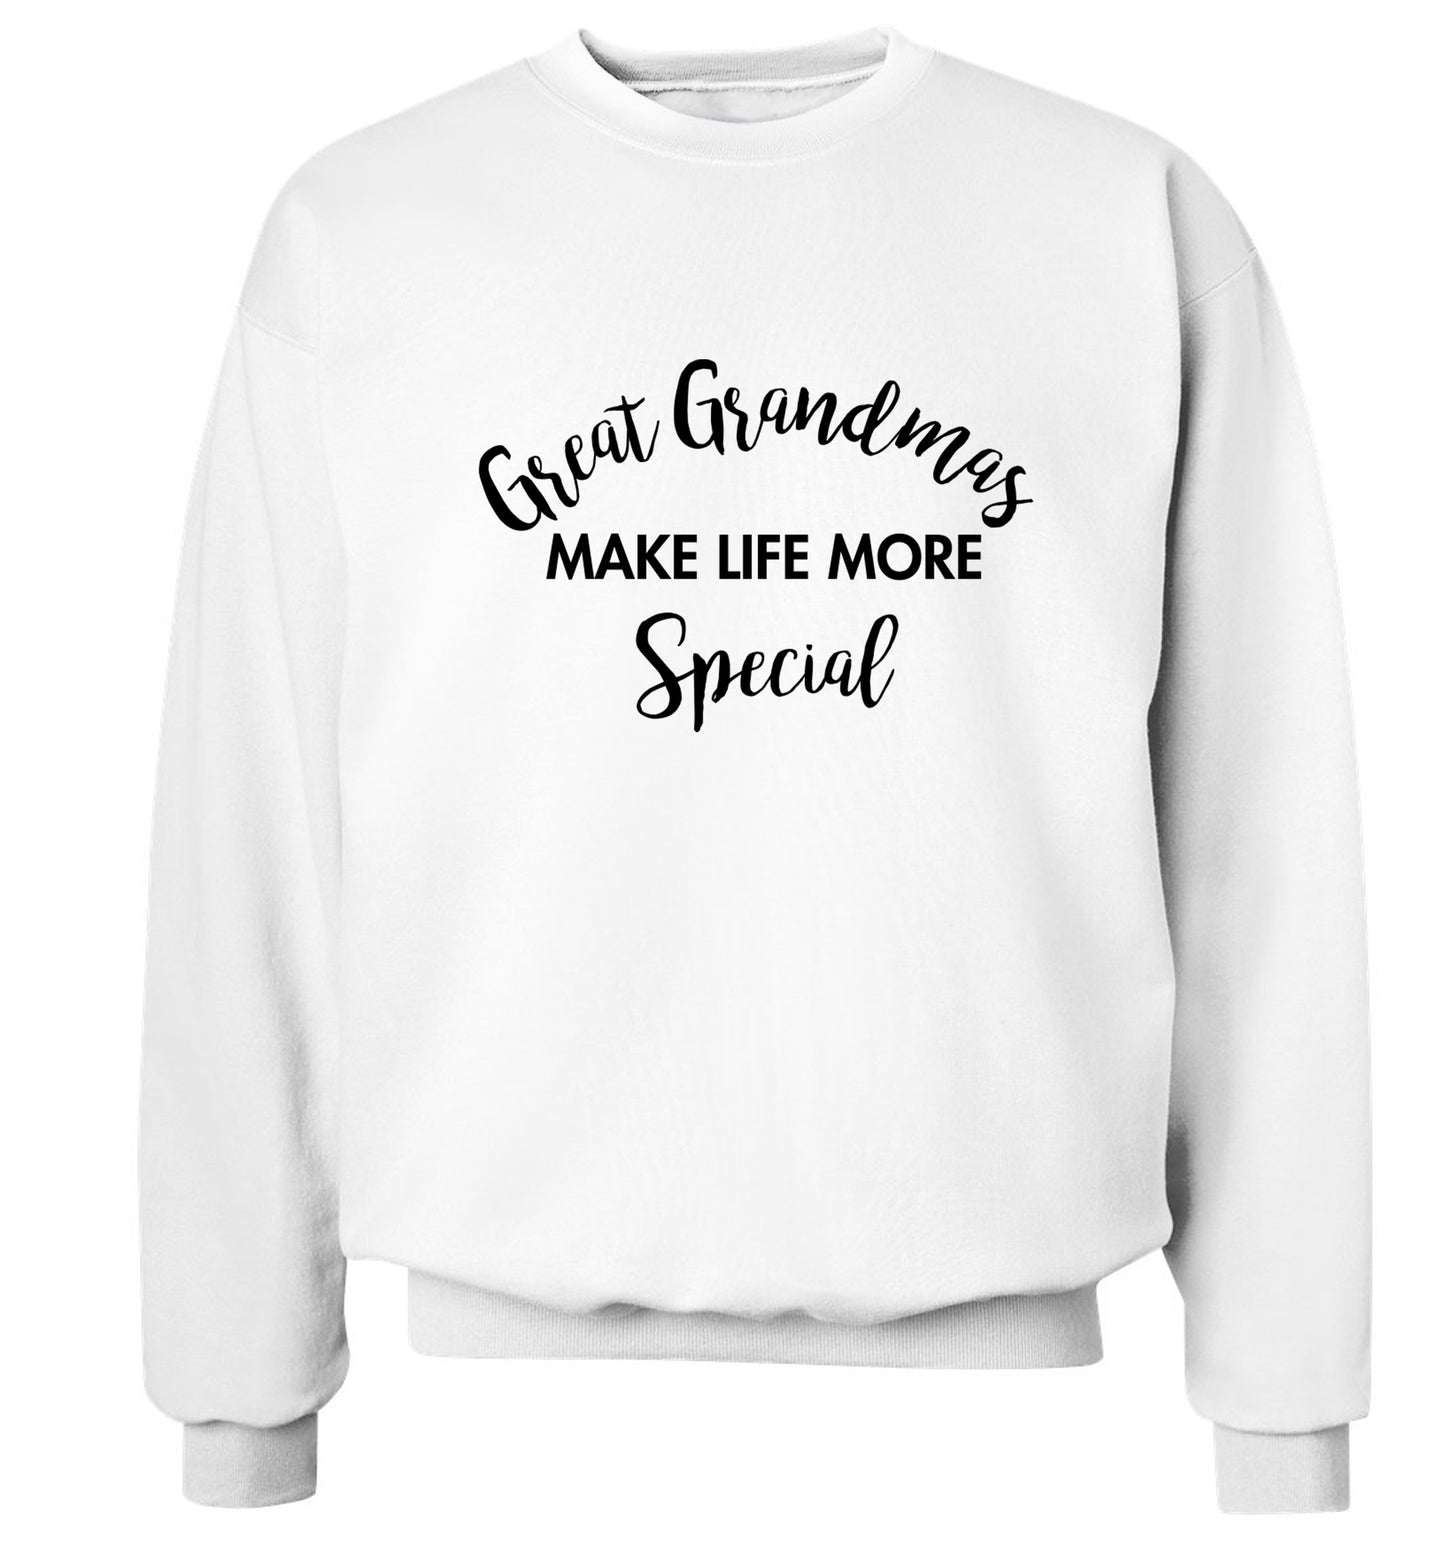 Great Grandmas make life more special Adult's unisex white Sweater 2XL